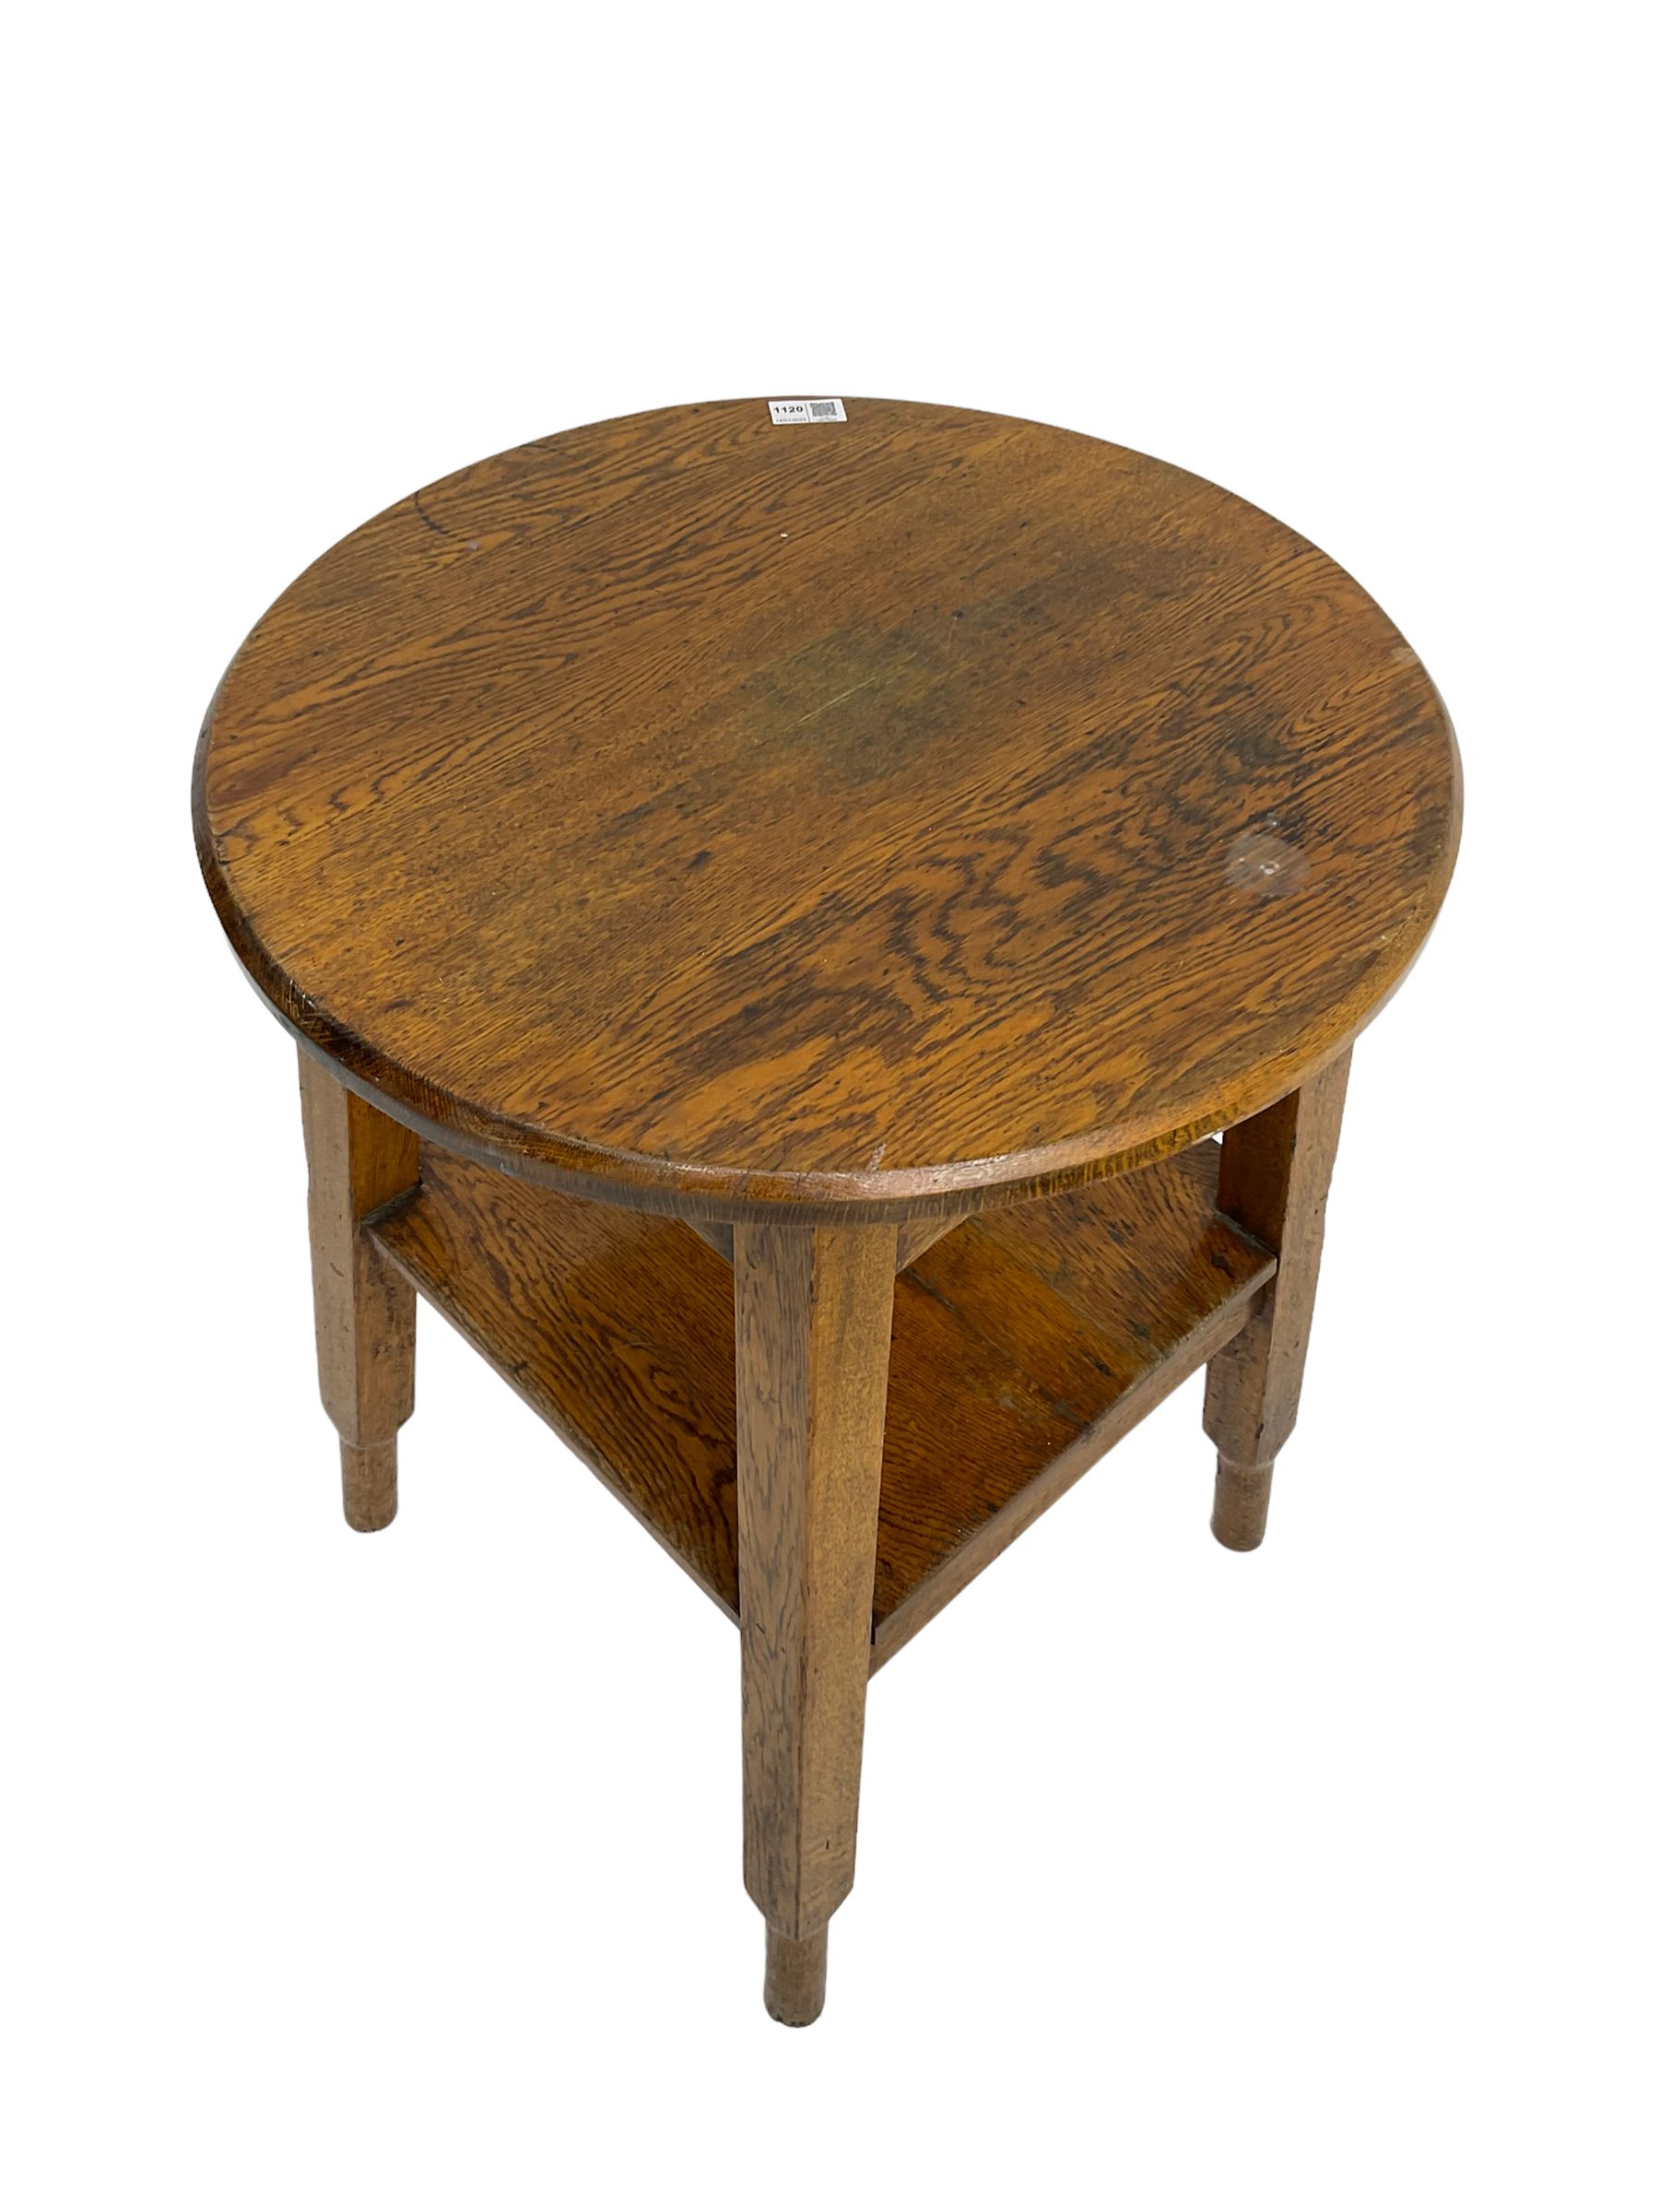 Early to mid-20th century oak tavern table - Image 2 of 4